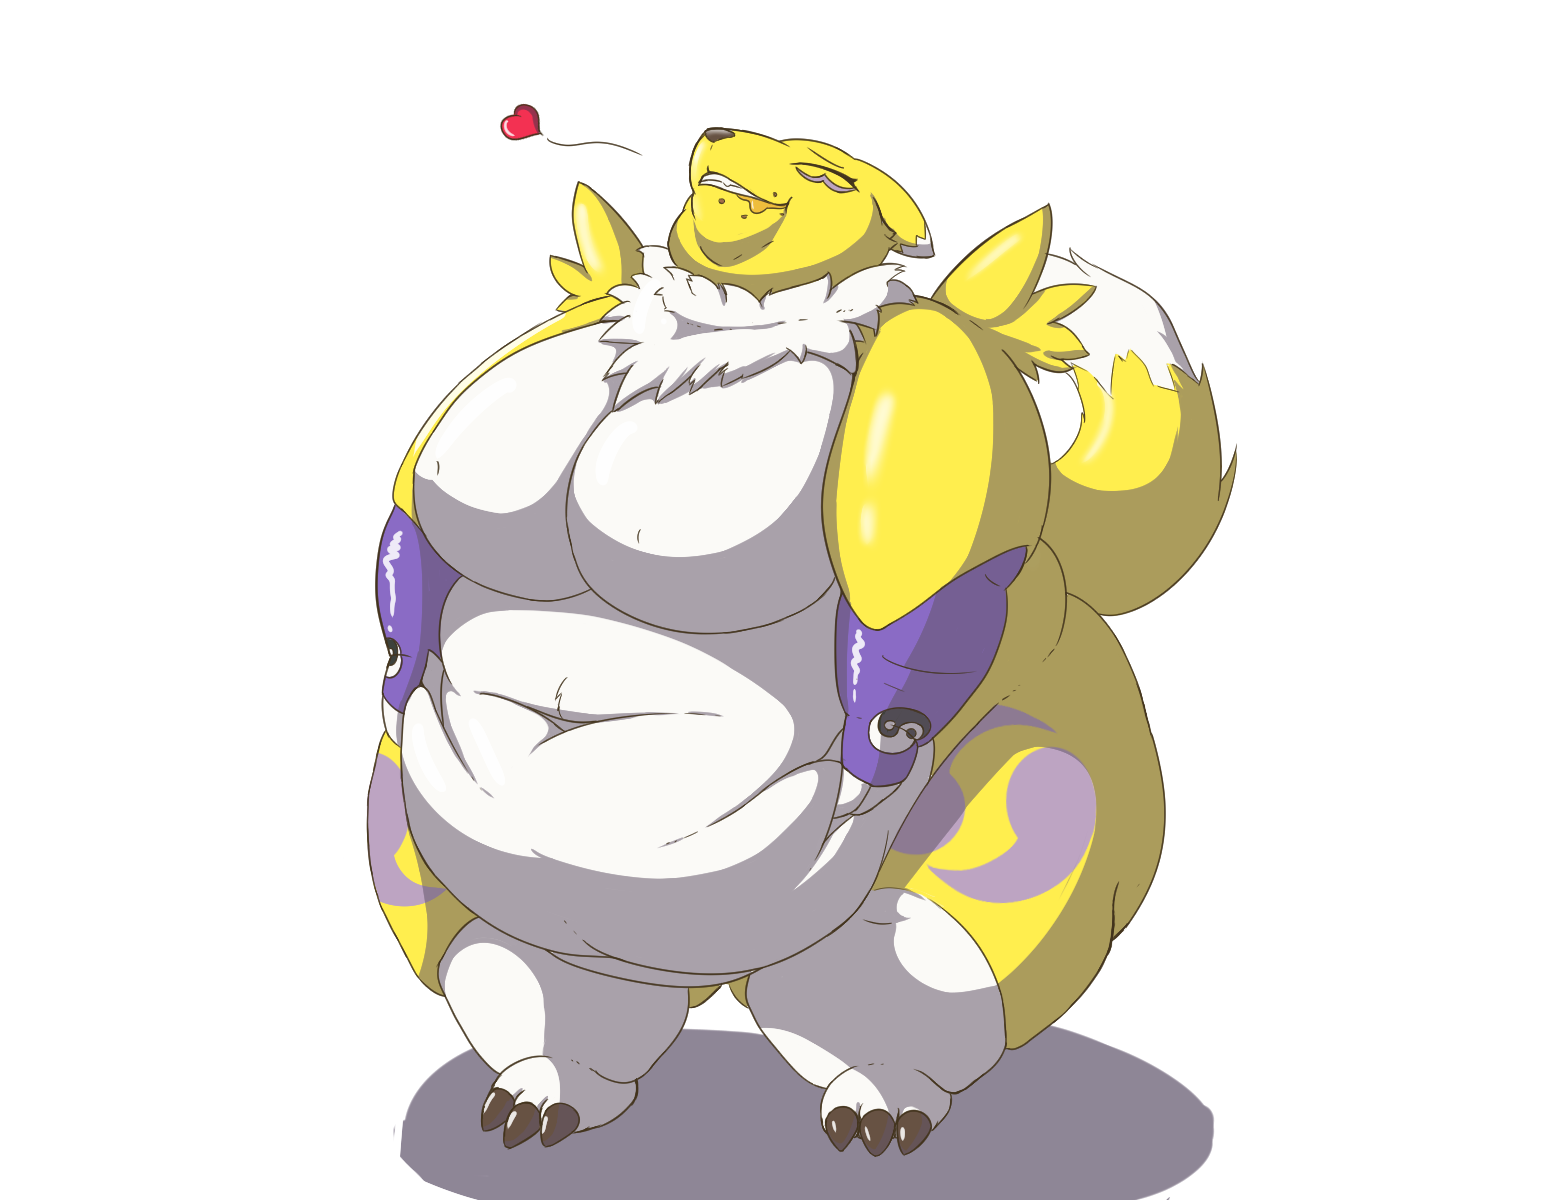 Another fat renamon. 